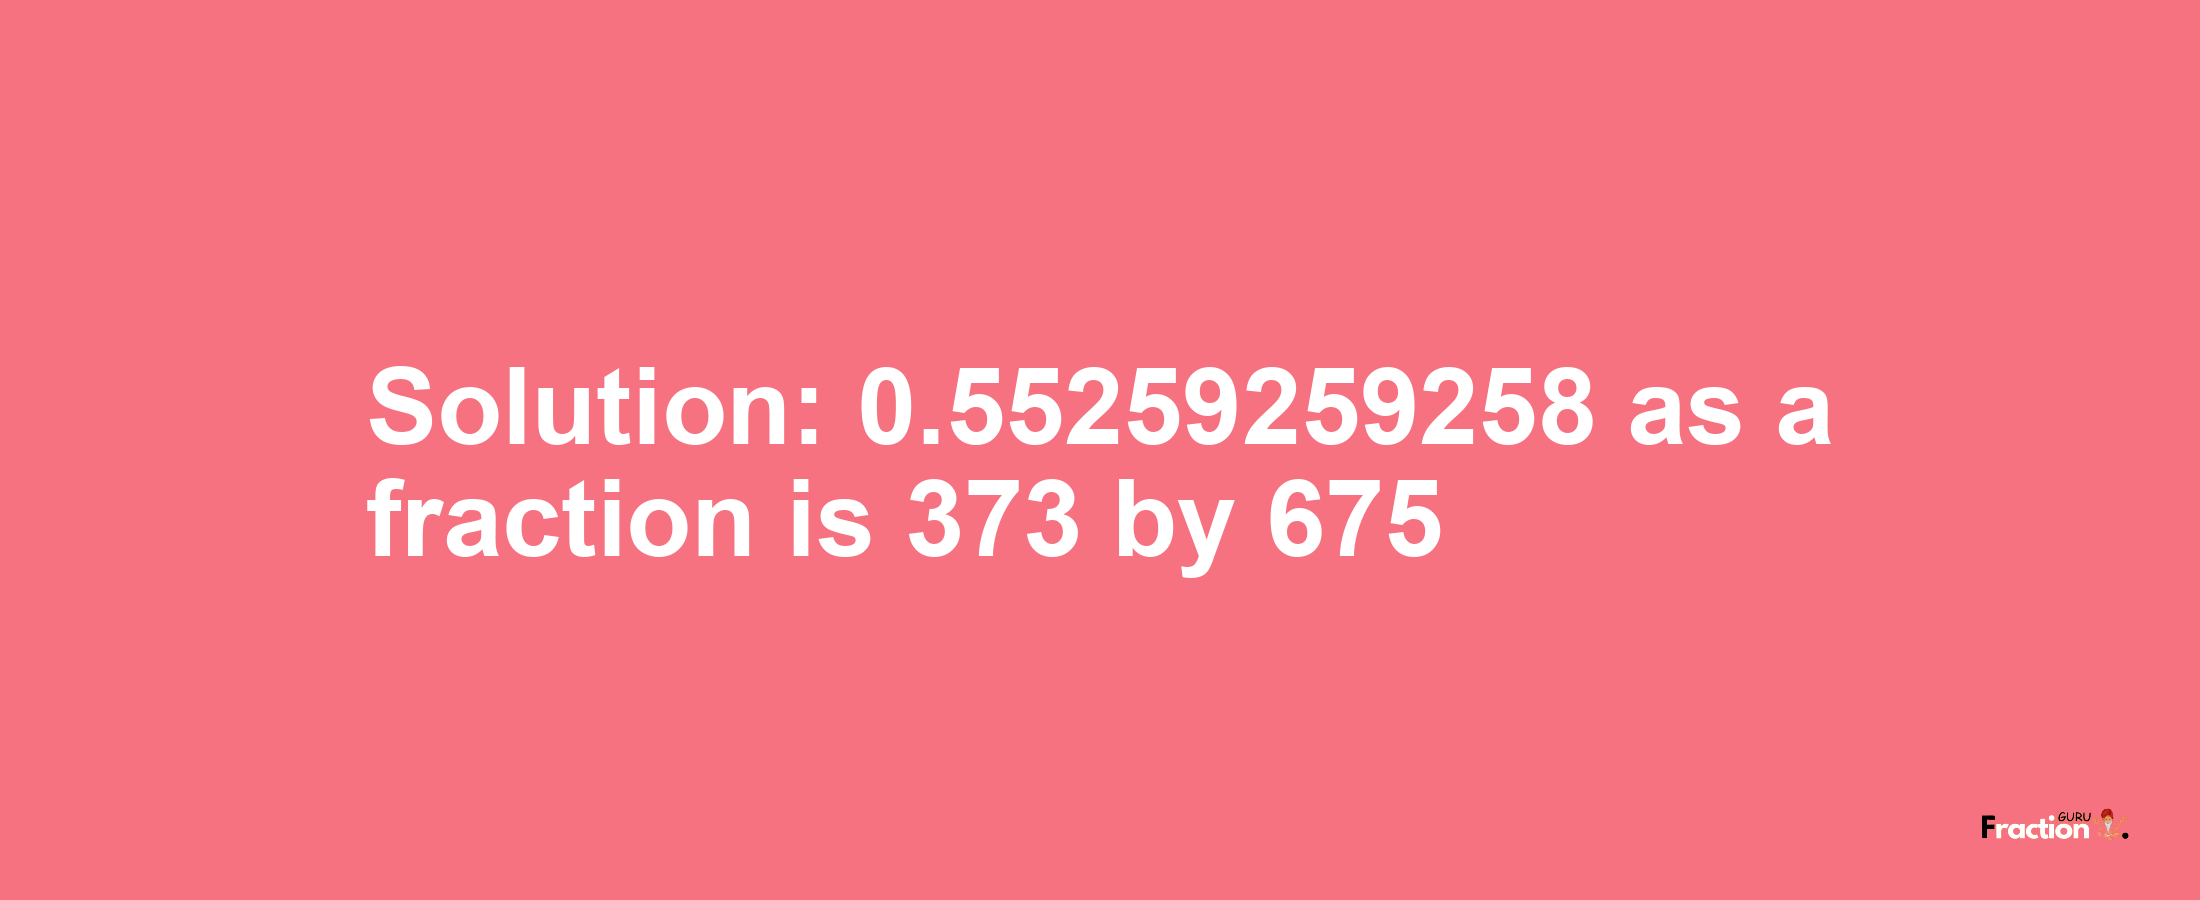 Solution:0.55259259258 as a fraction is 373/675